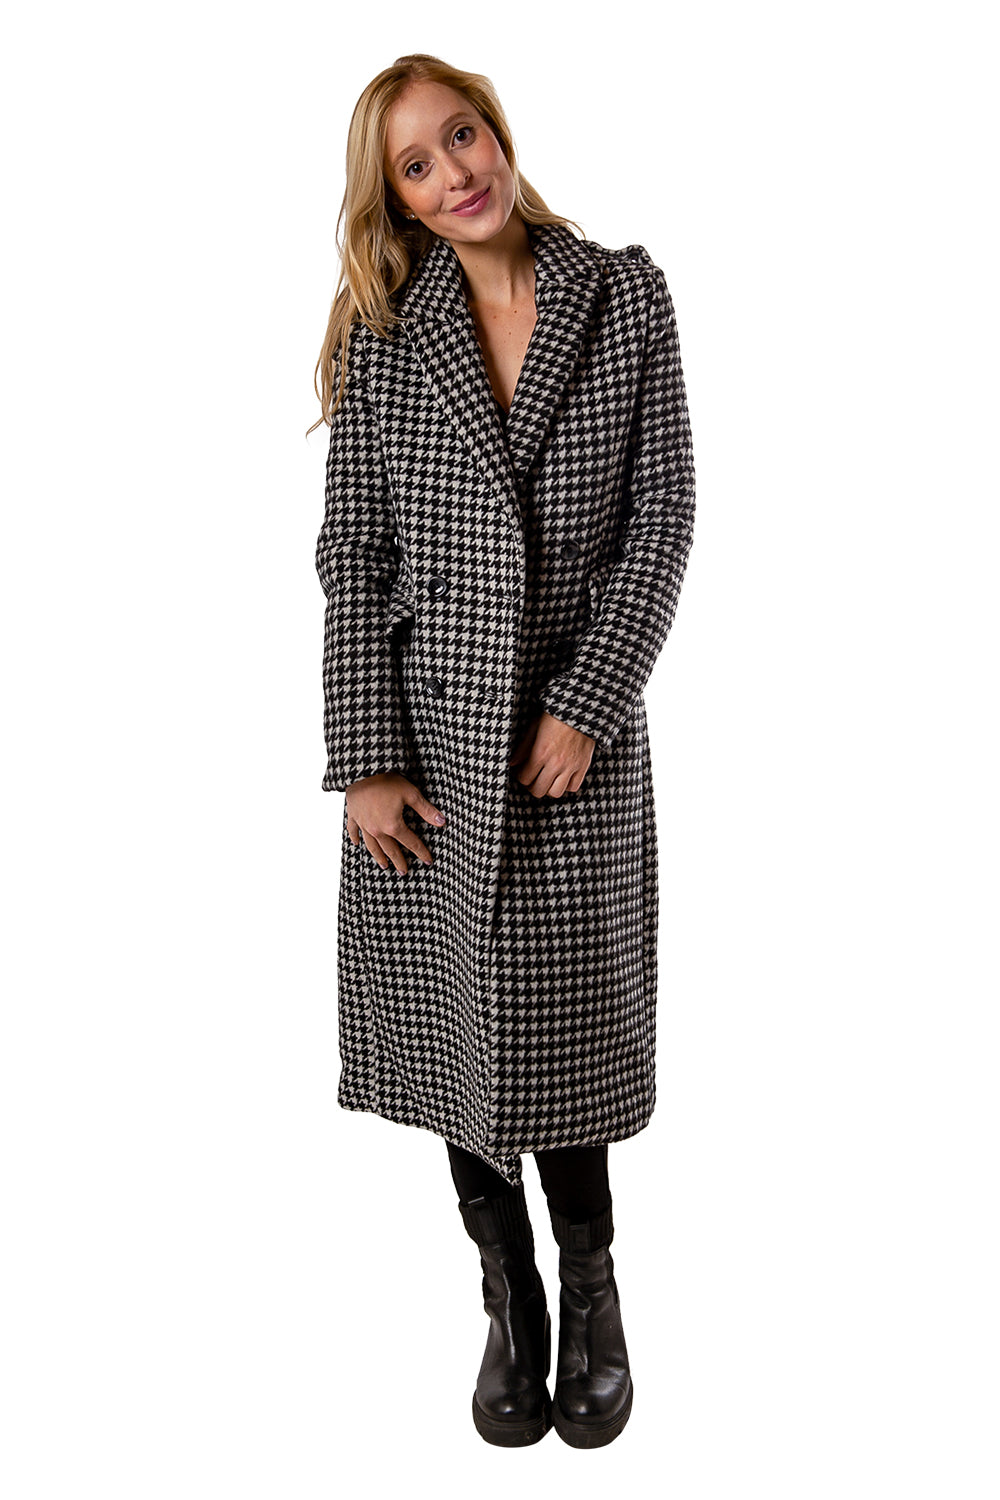 EP X RJ Tailored Coat - Black Houndstooth